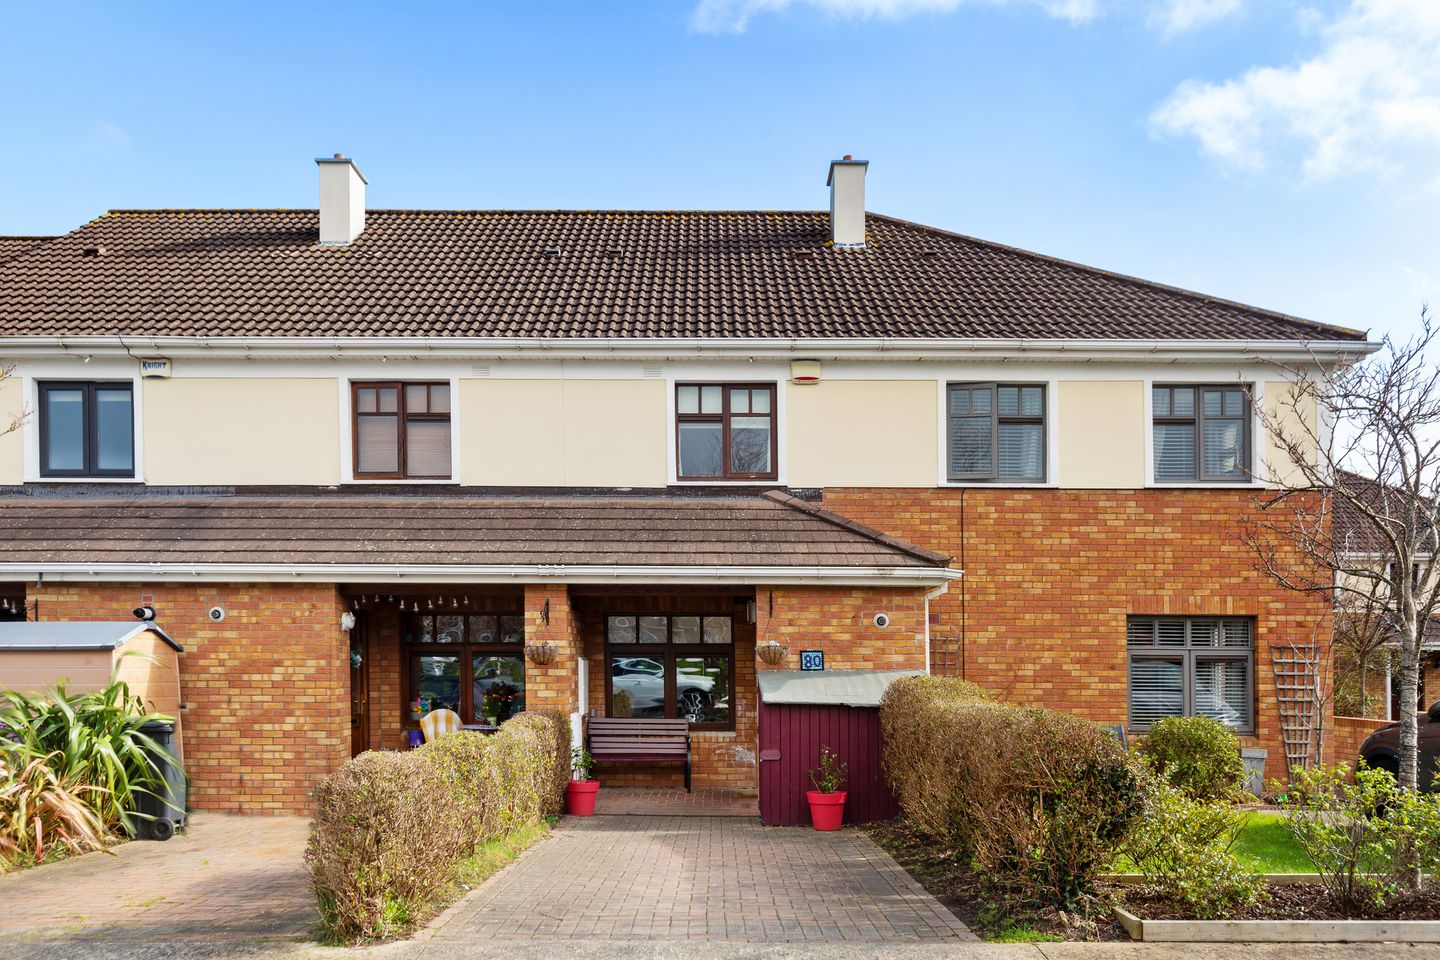 80 Charlesland Park, Greystones, Co. Wicklow, A63VH29